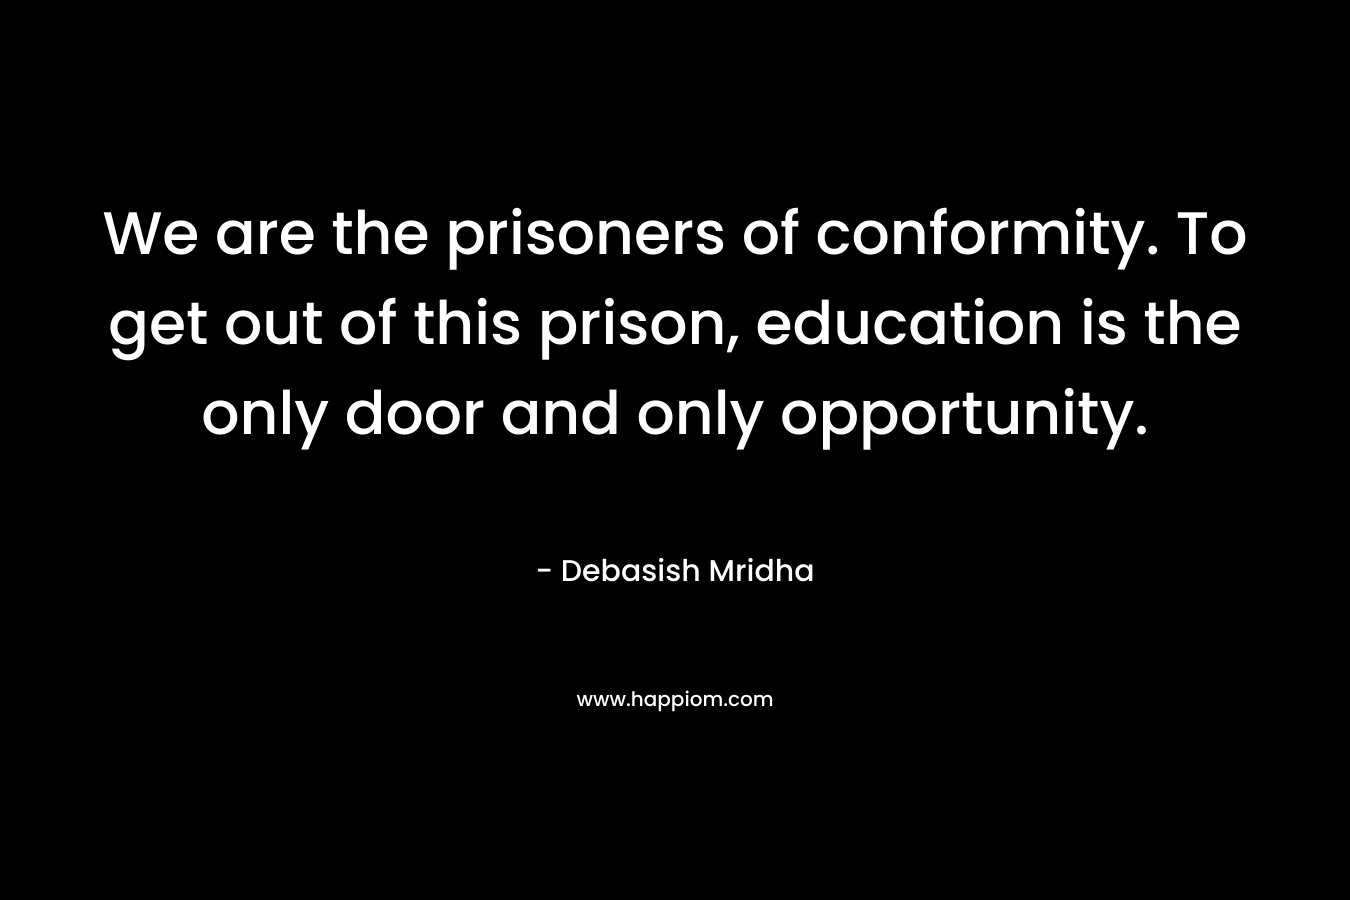 We are the prisoners of conformity. To get out of this prison, education is the only door and only opportunity. – Debasish Mridha